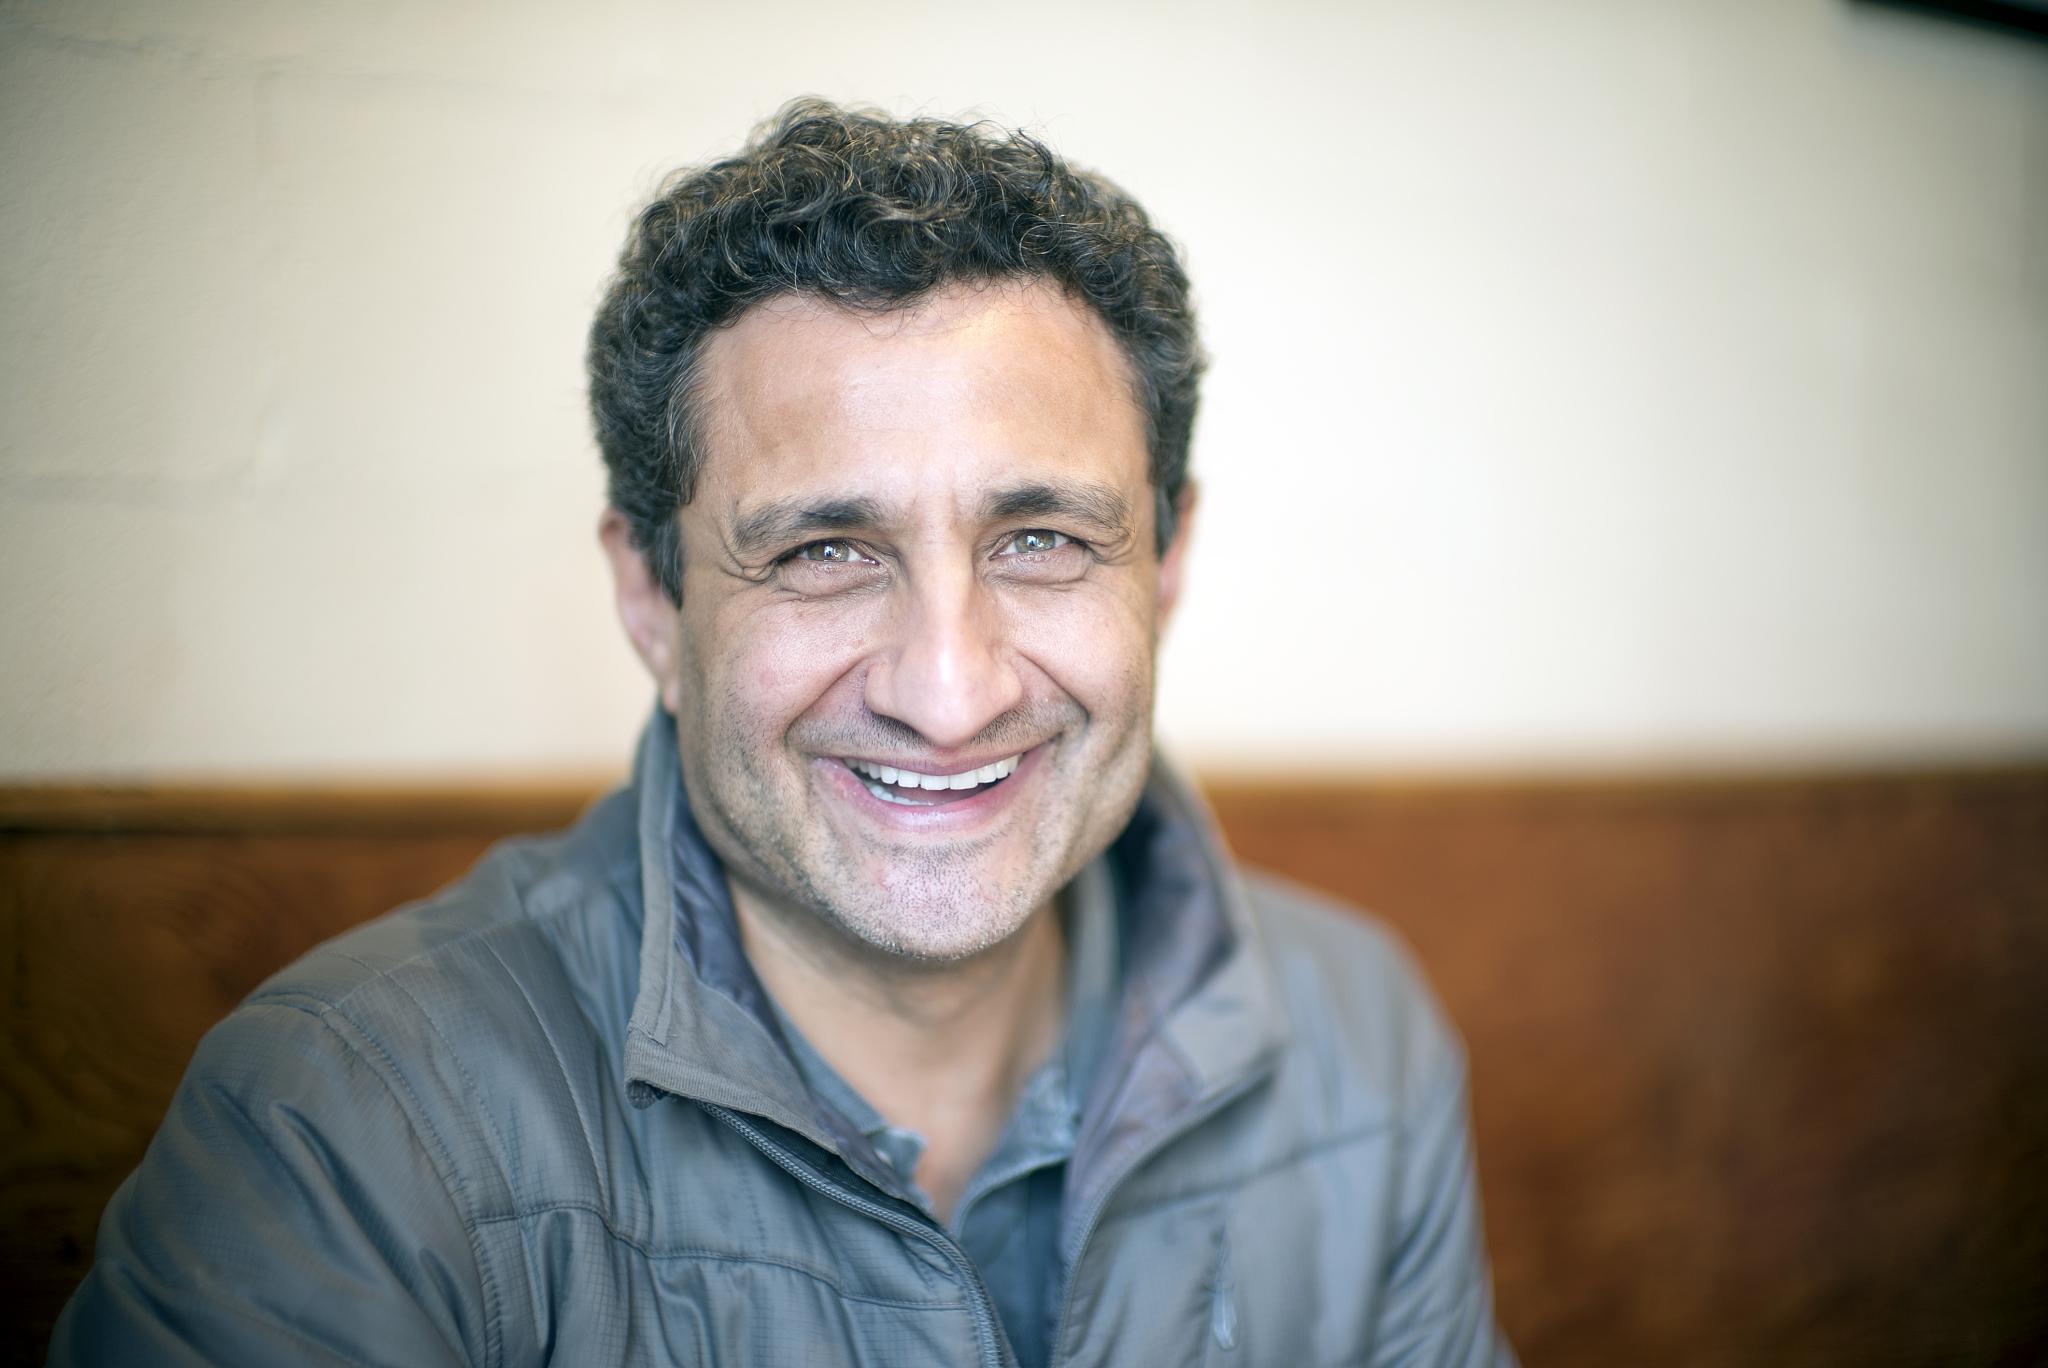 a man with curly hair and a grey shirt smiles at the camera